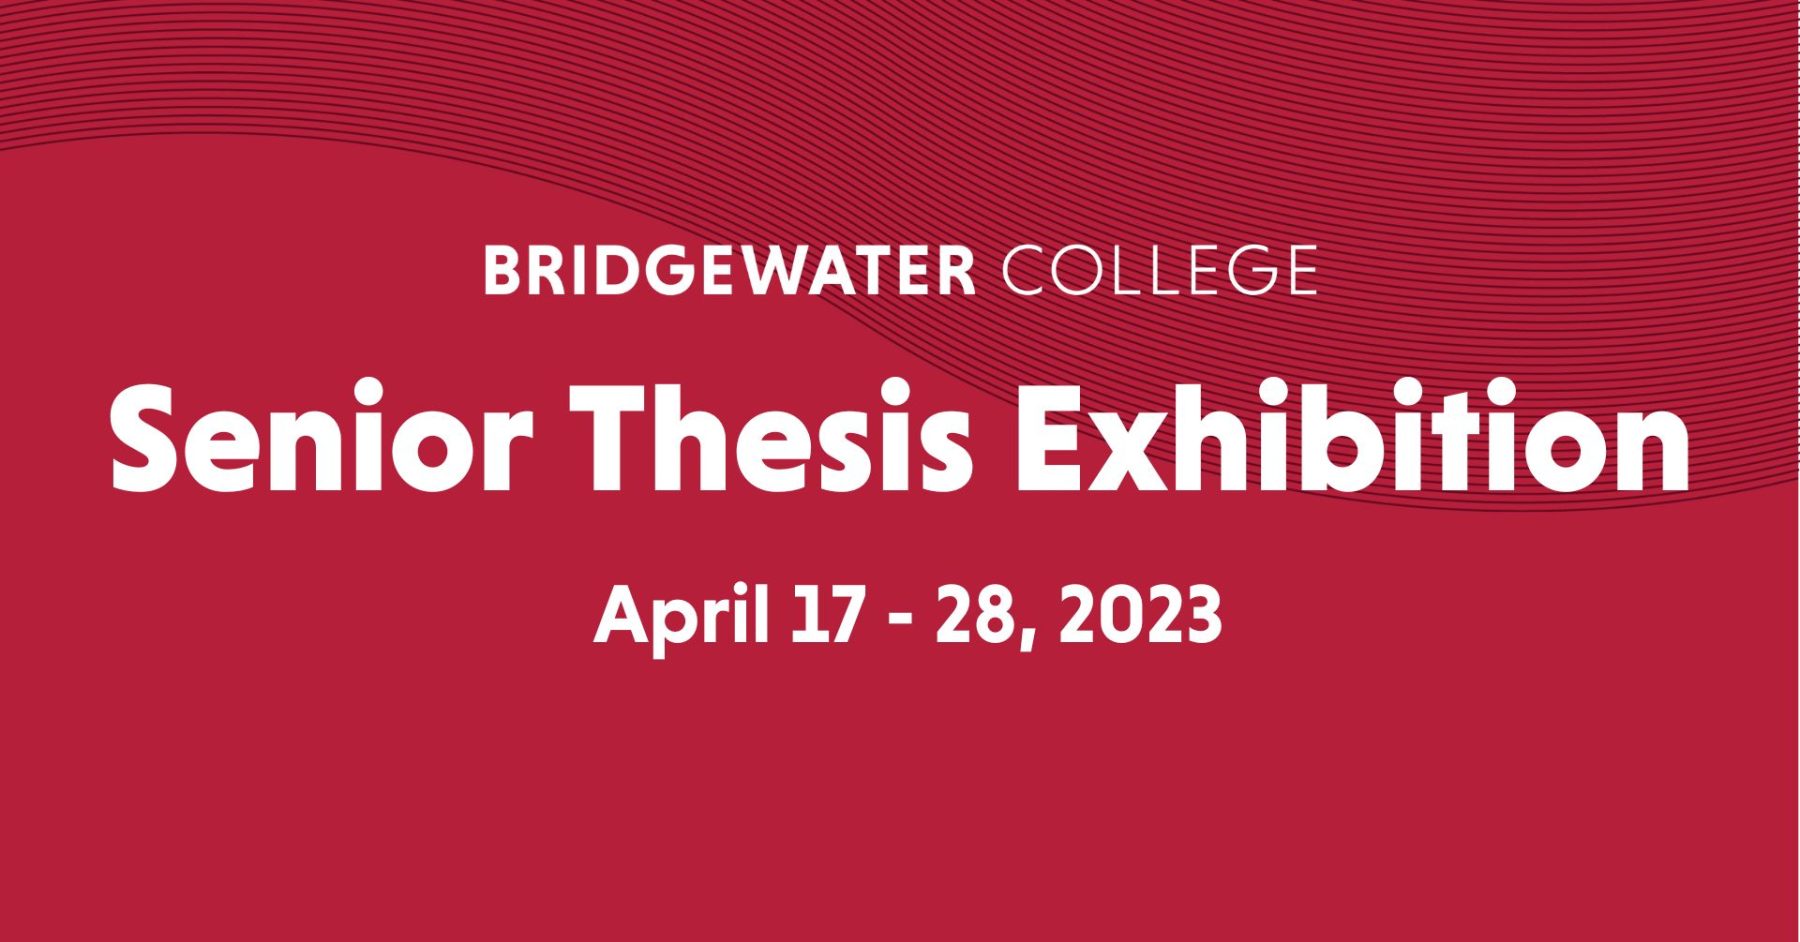 a red graphic that reads: Bridgewater College Senior Thesis Exhibition April 17 - 28, 2023